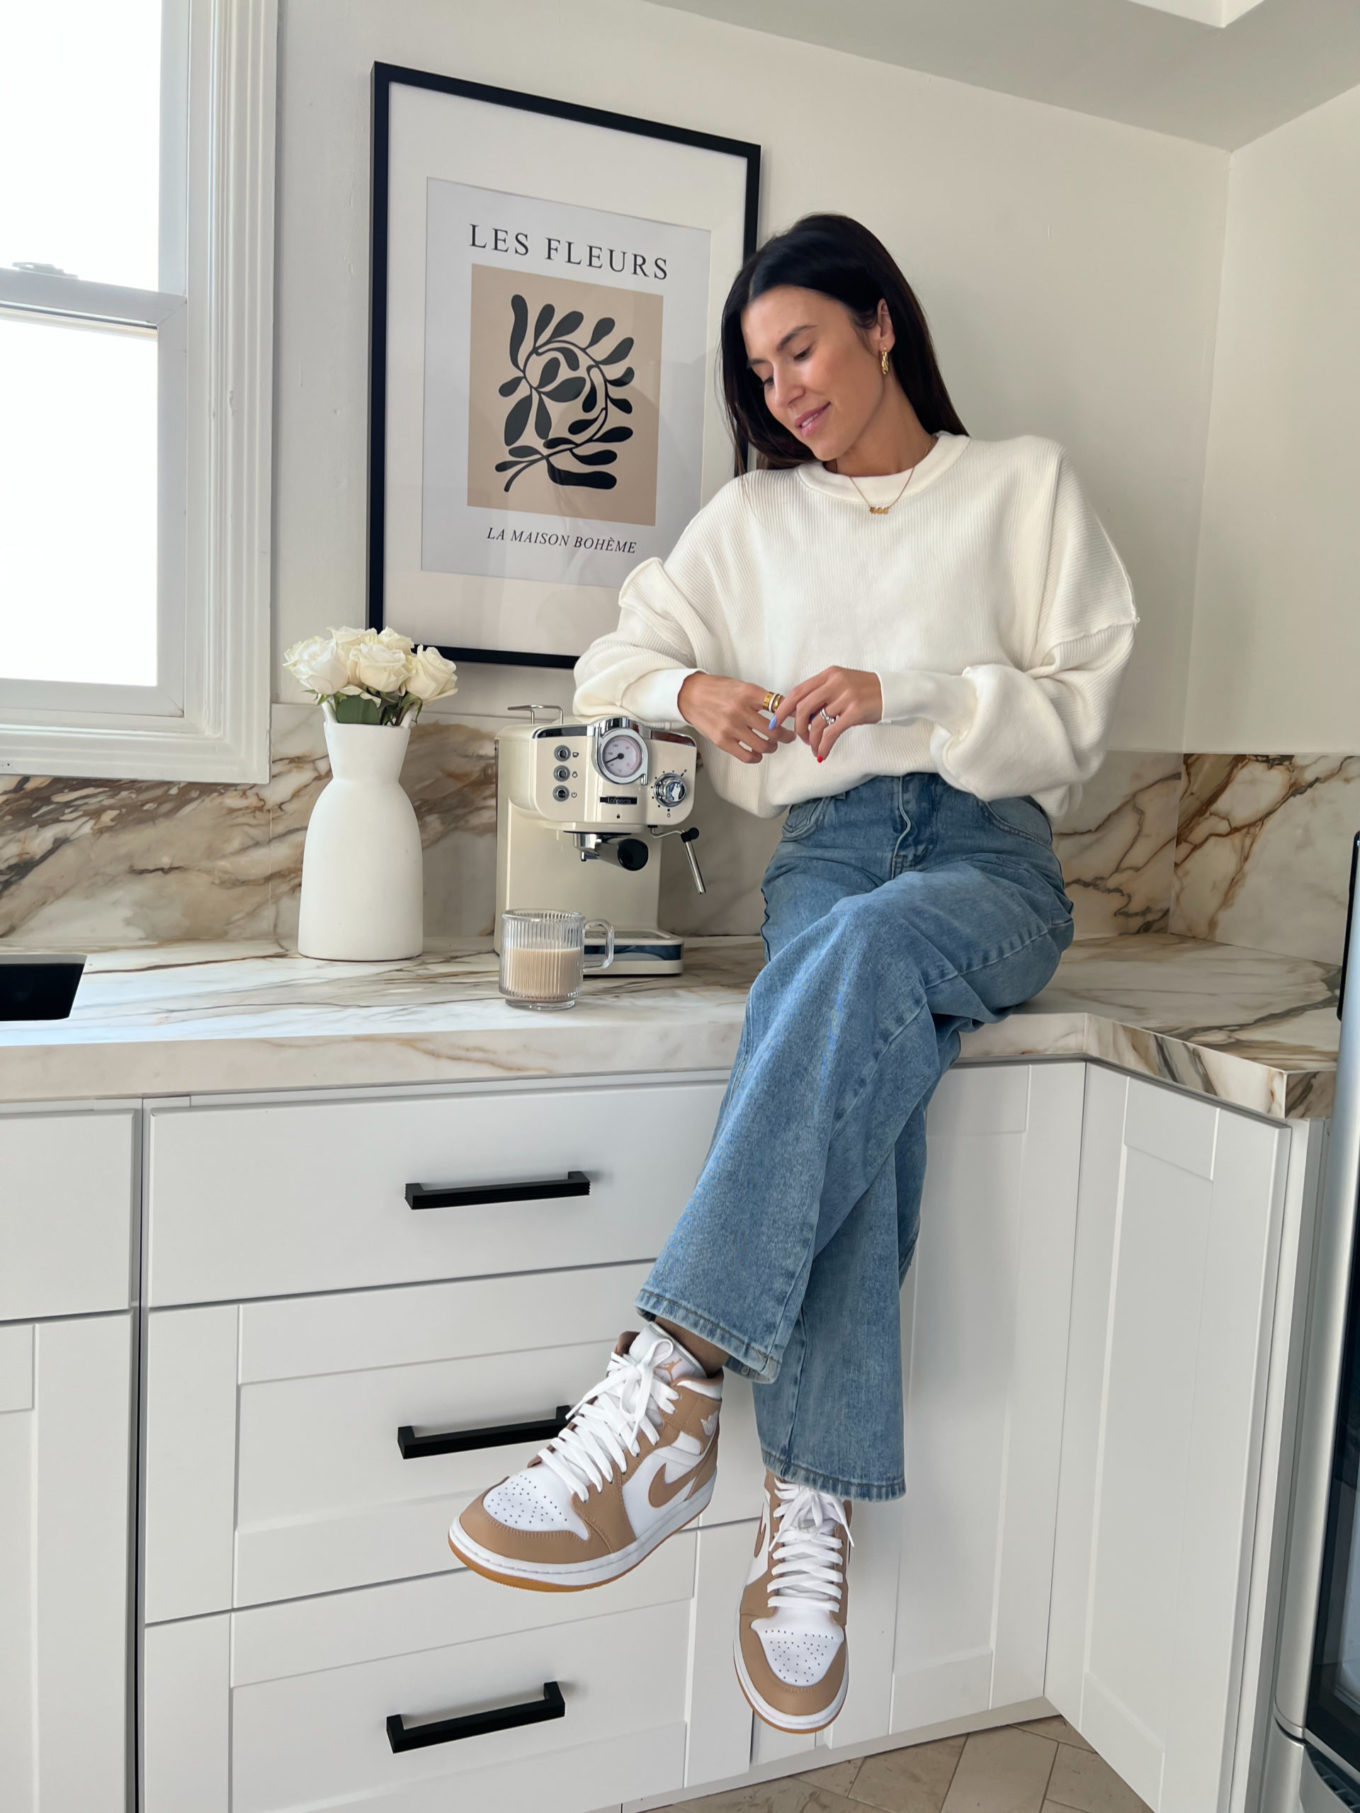 amazon home, espresso machine, print les fleurs, glass coffee mugs, white sweater, denim jeans, brown leather shoes, gold jewelry